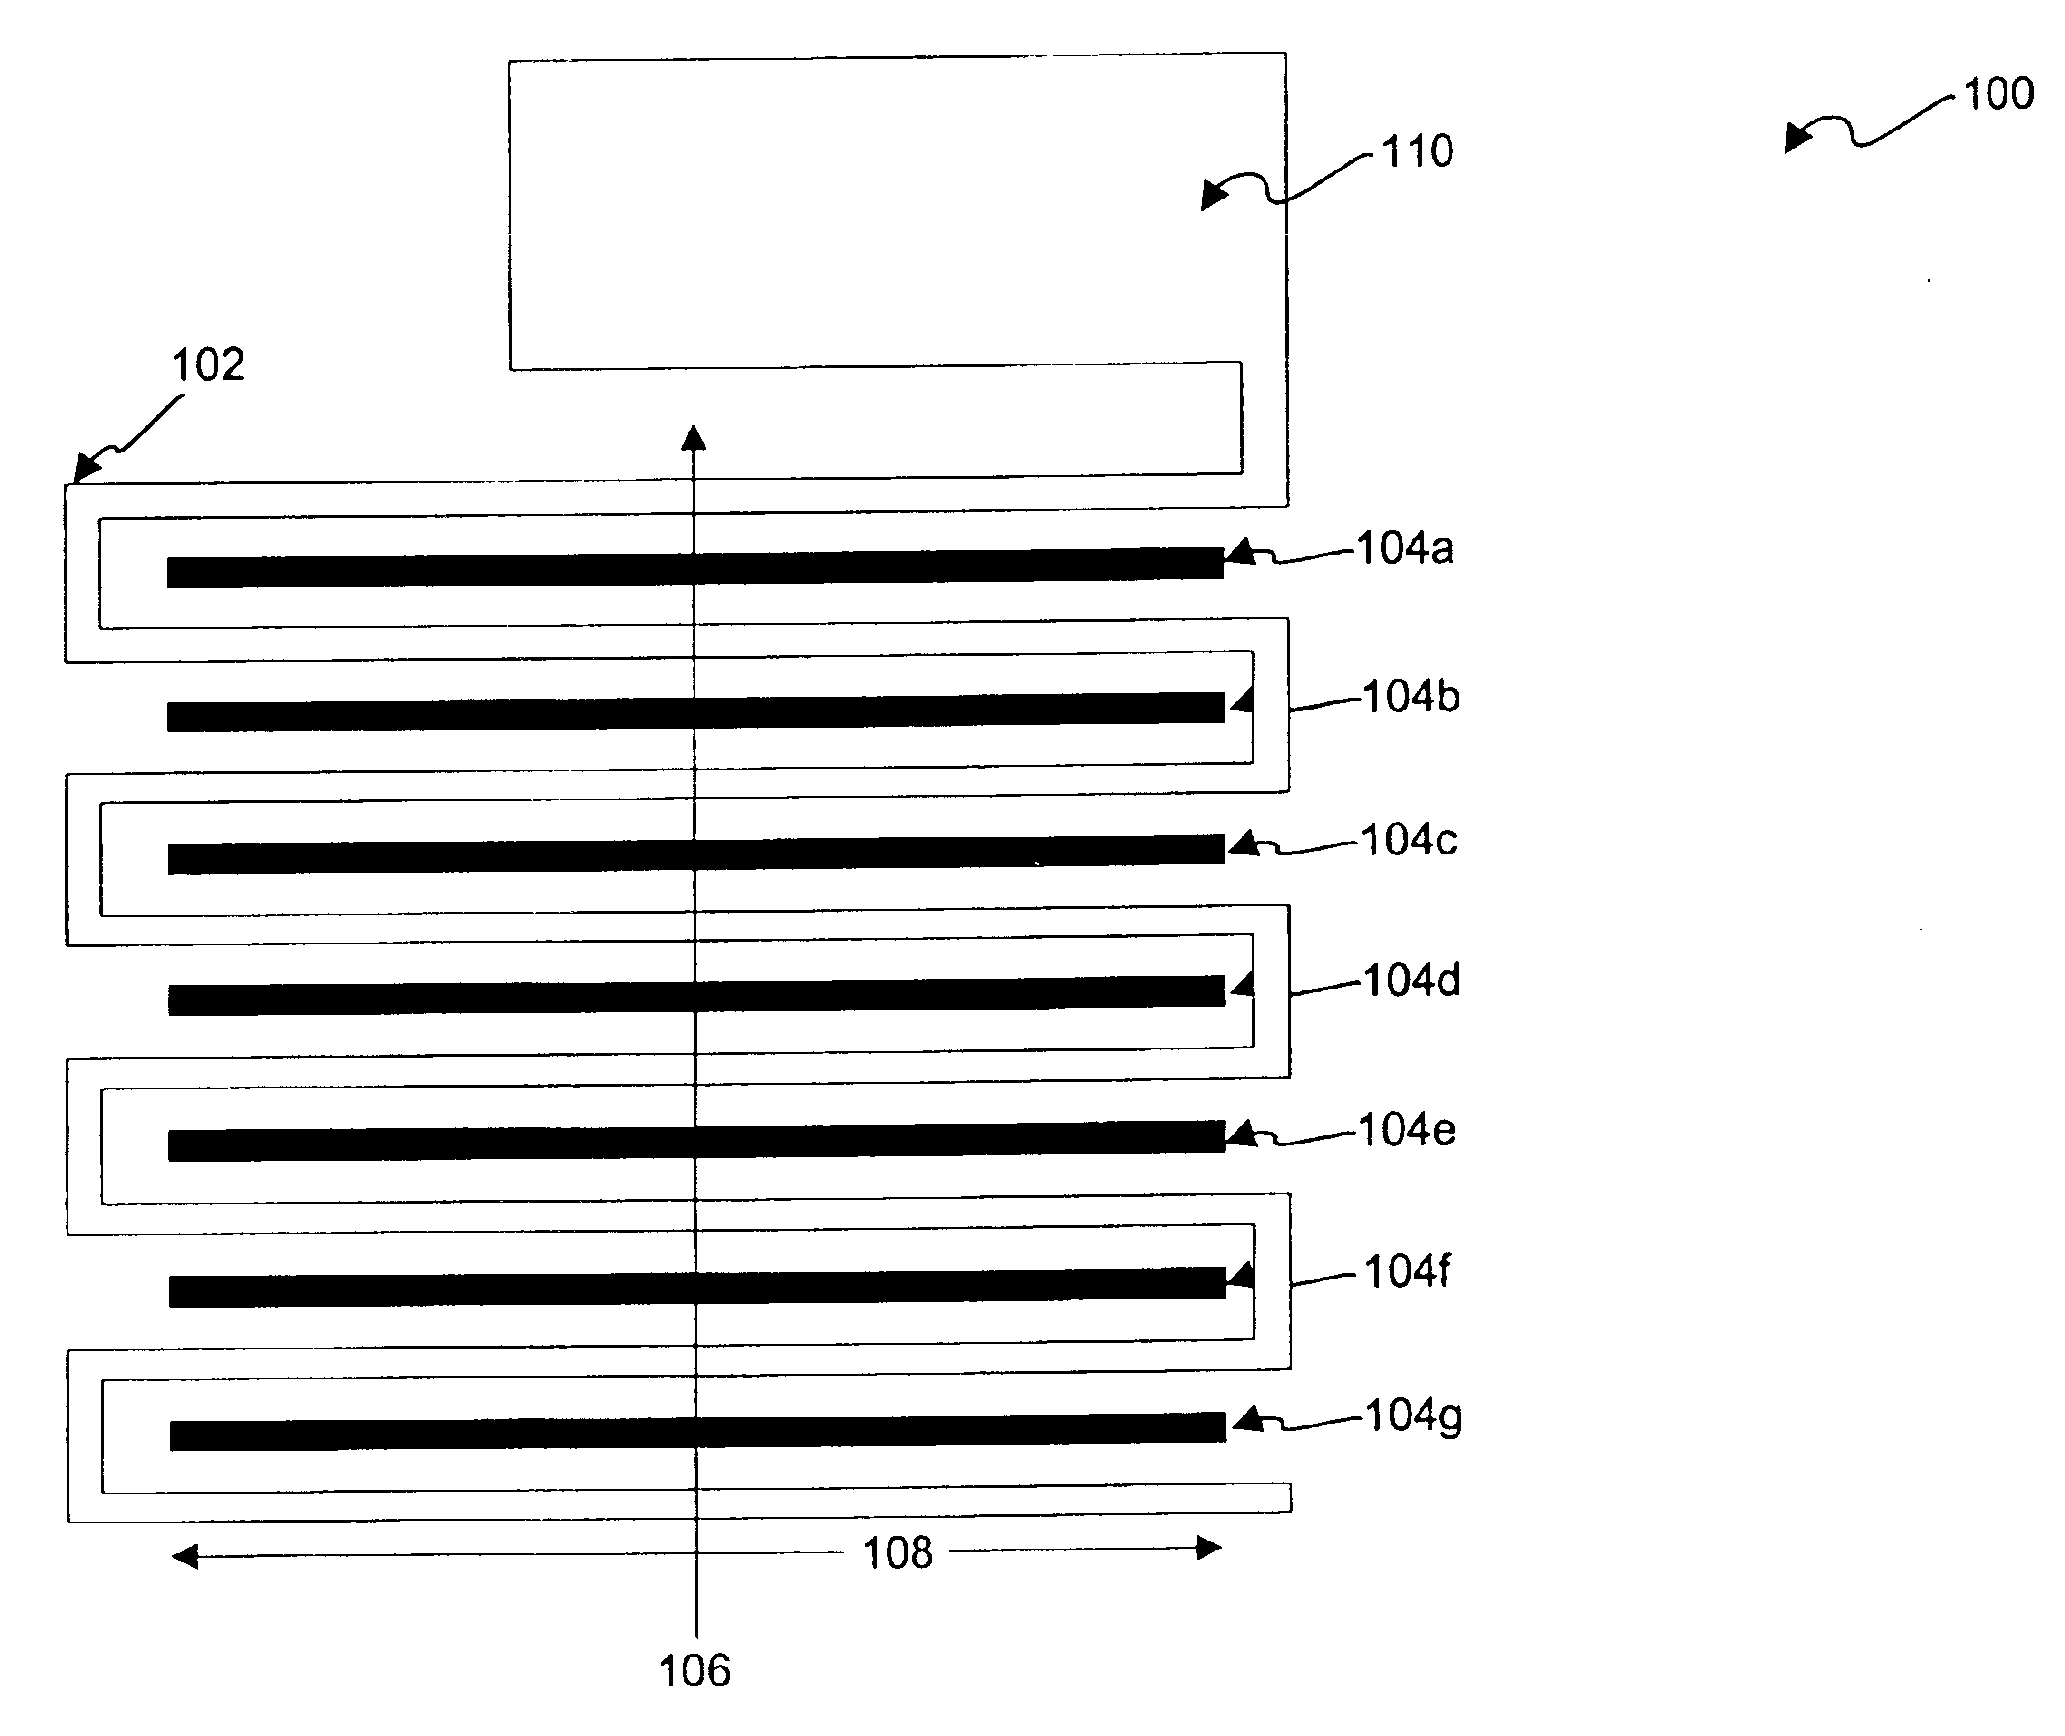 Apparatus and methods for semiconductor IC failure detection